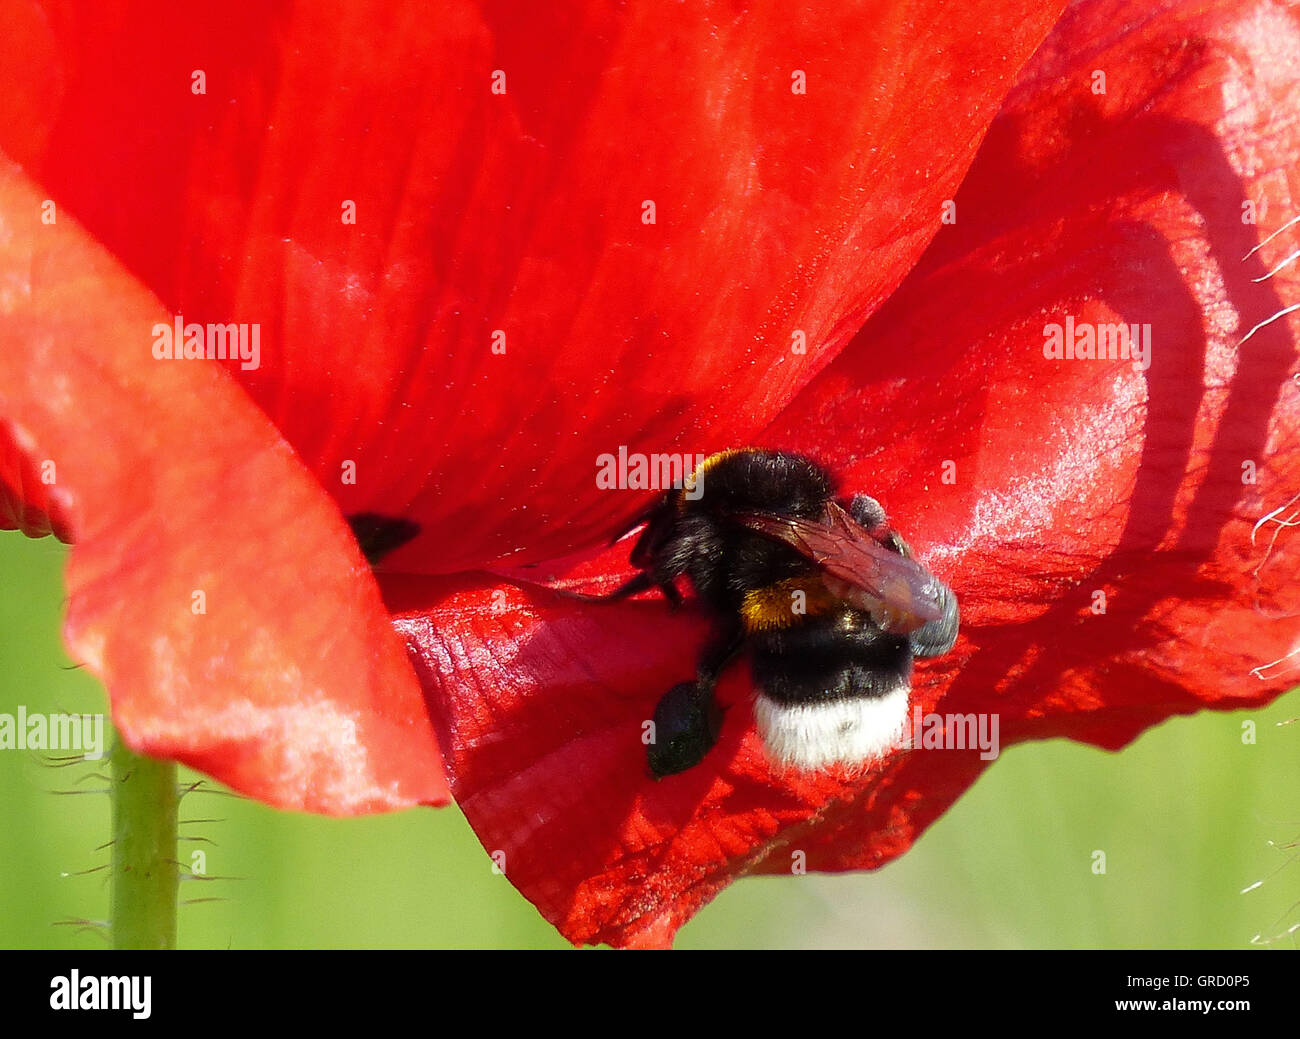 Bumblebee Landing In A Red Poppy Flower Stock Photo